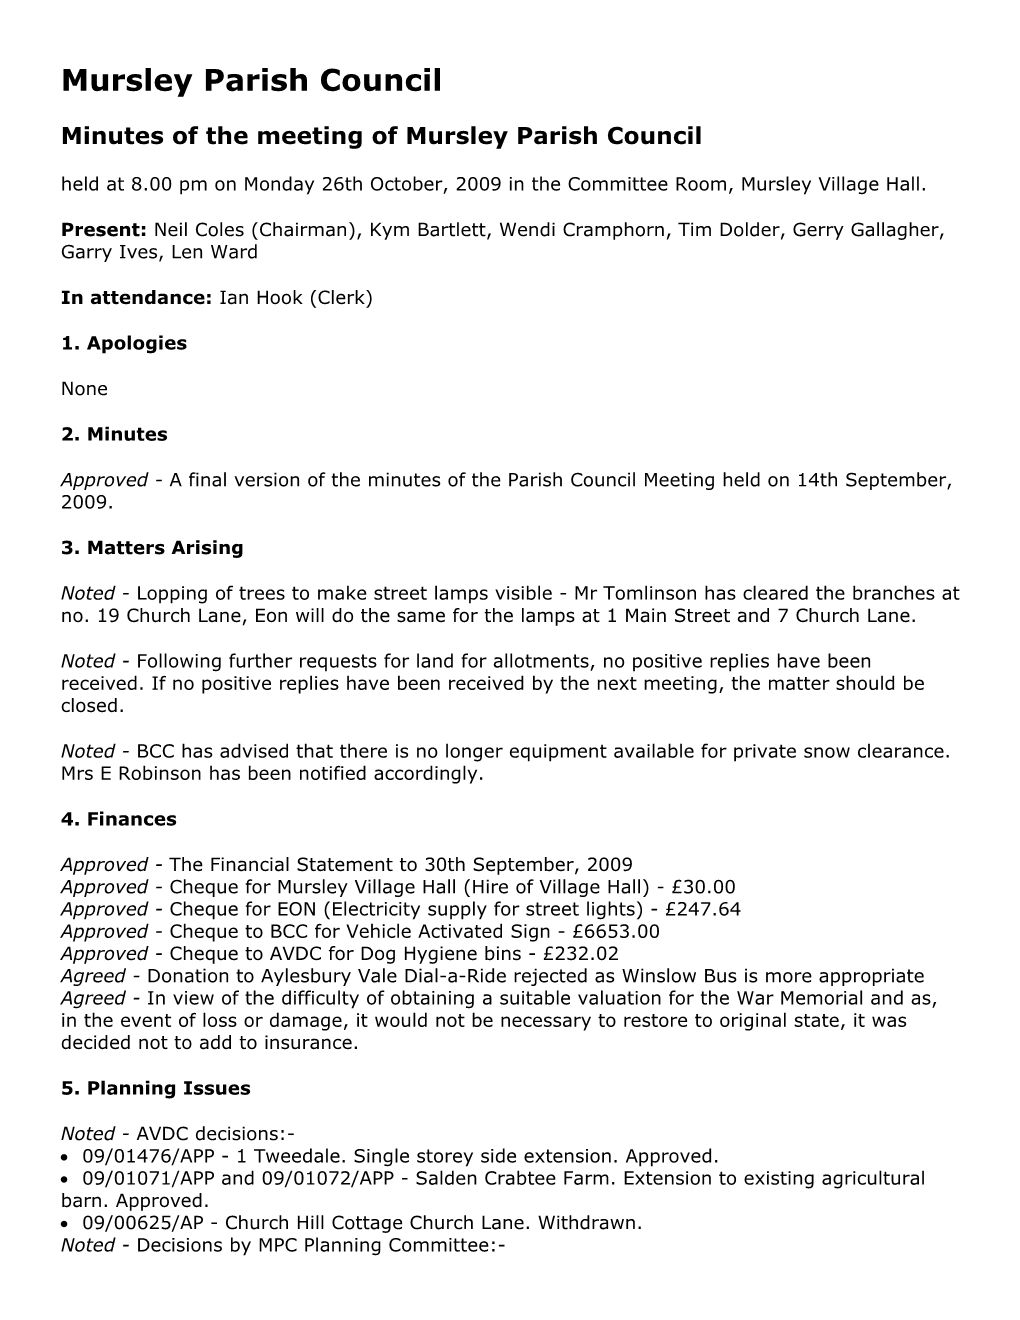 Minutes of the Meeting of Mursley Parish Council